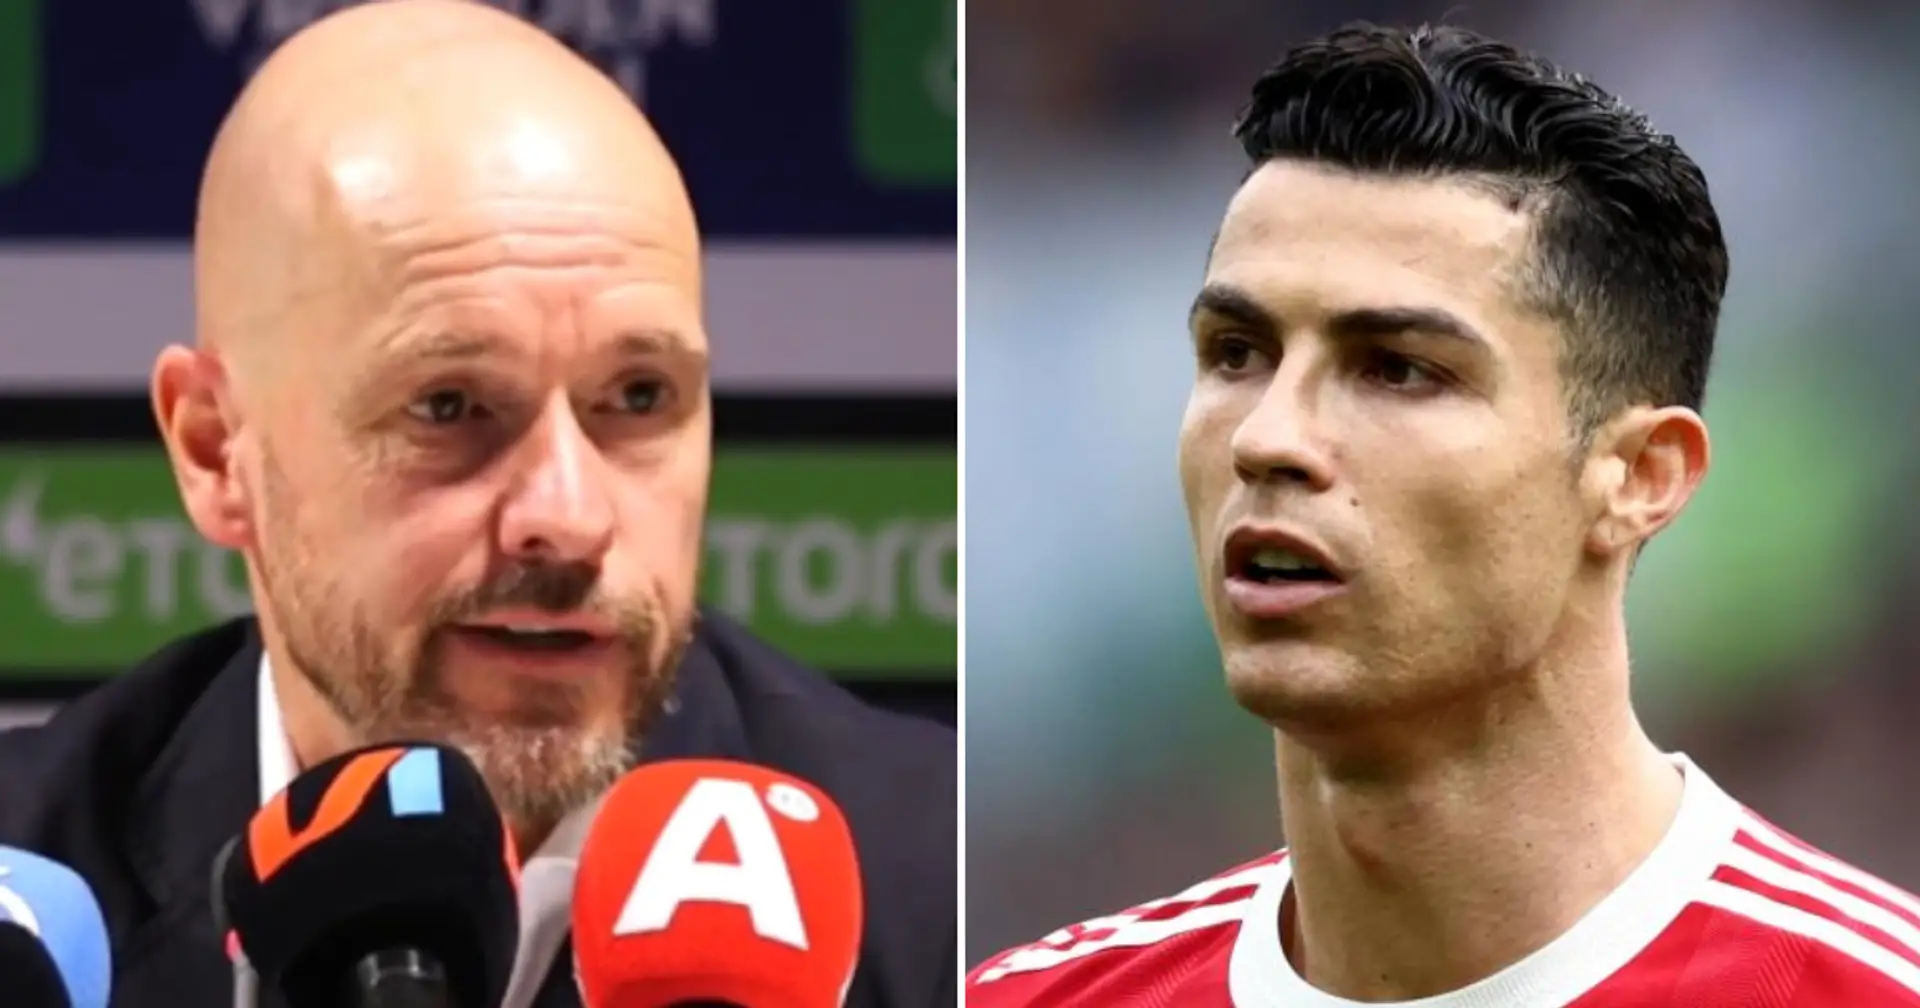 Ten Hag confirms he switches focus to United, reveals Cristiano Ronaldo plans